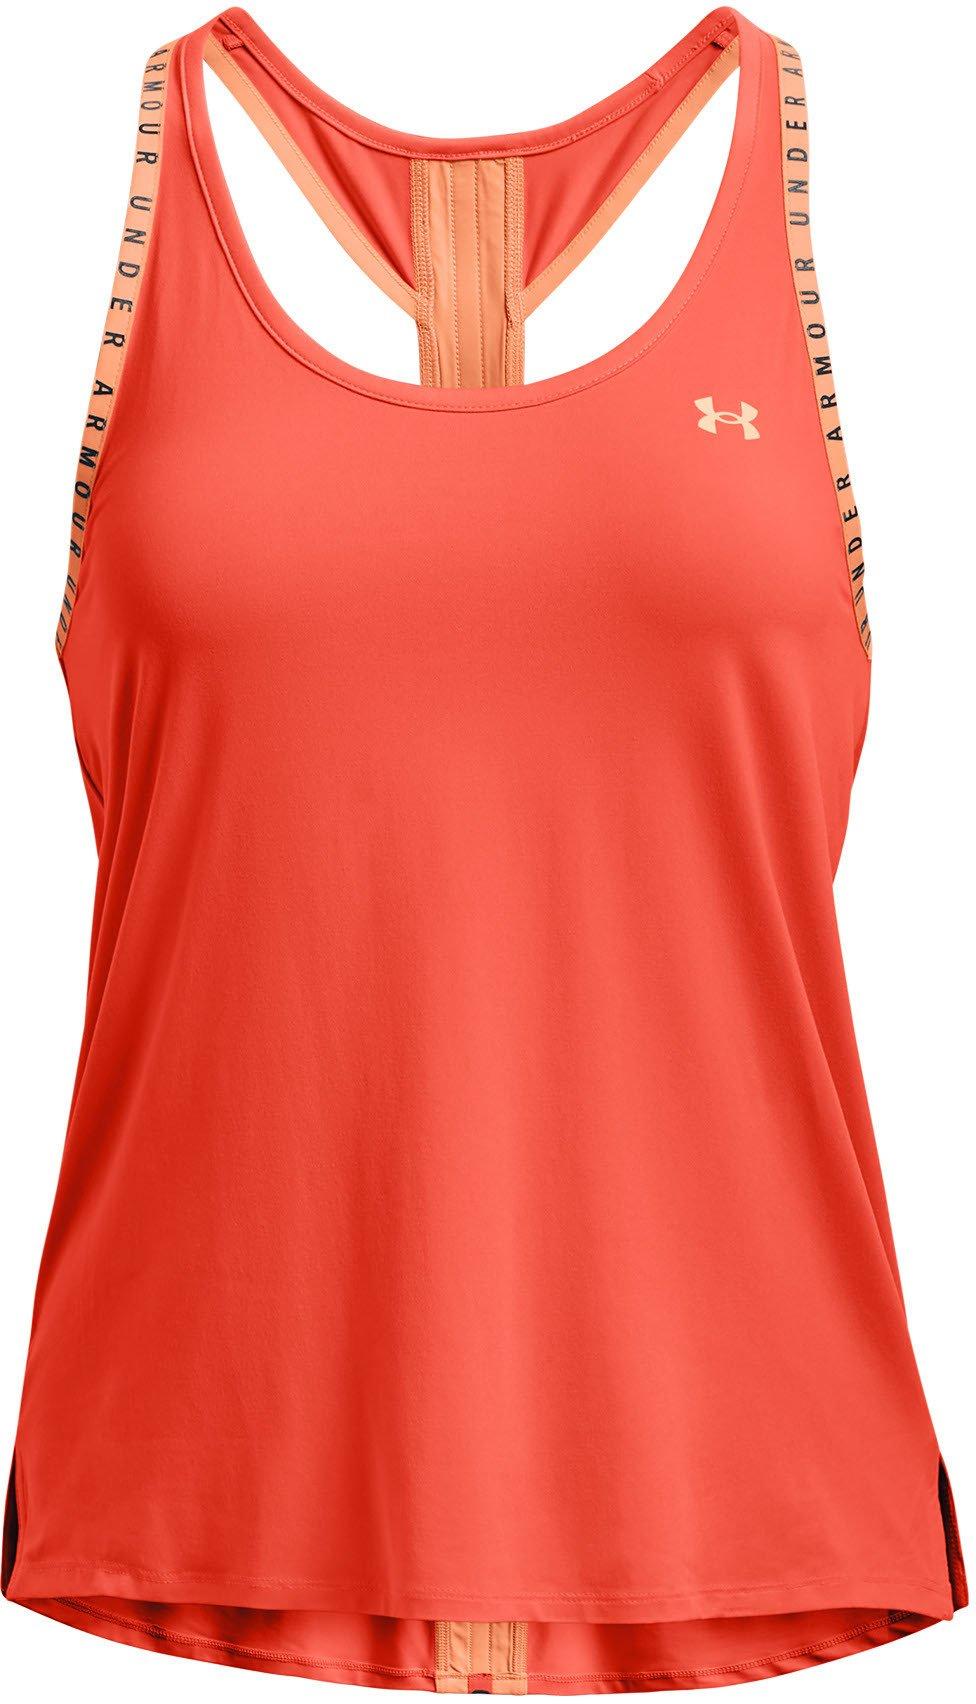 Under Armour Knockout Tank-ORG M